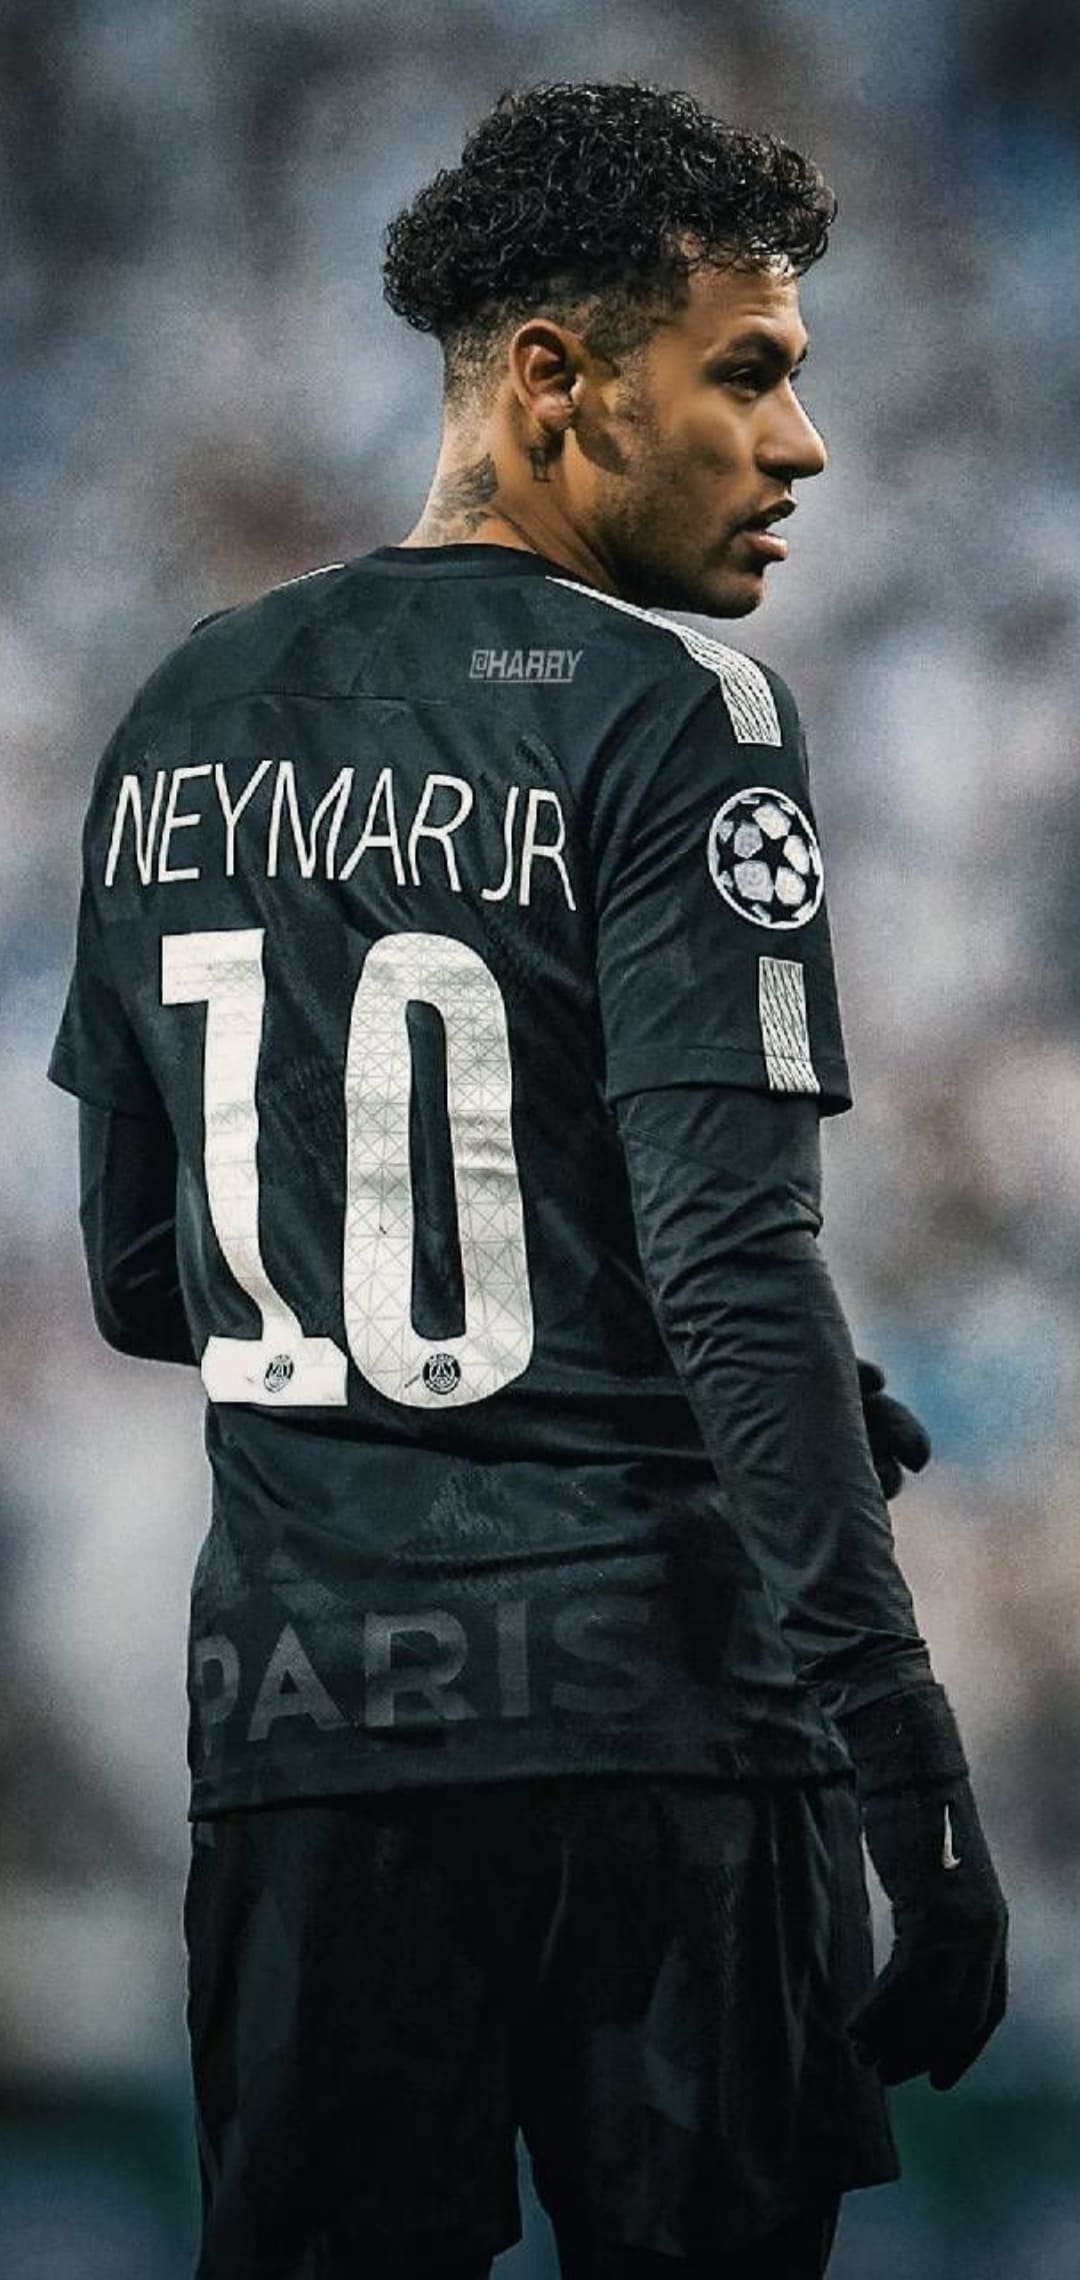 Neymar 10 Wallpaper, HD Sports 4K Wallpapers, Images and Background -  Wallpapers Den